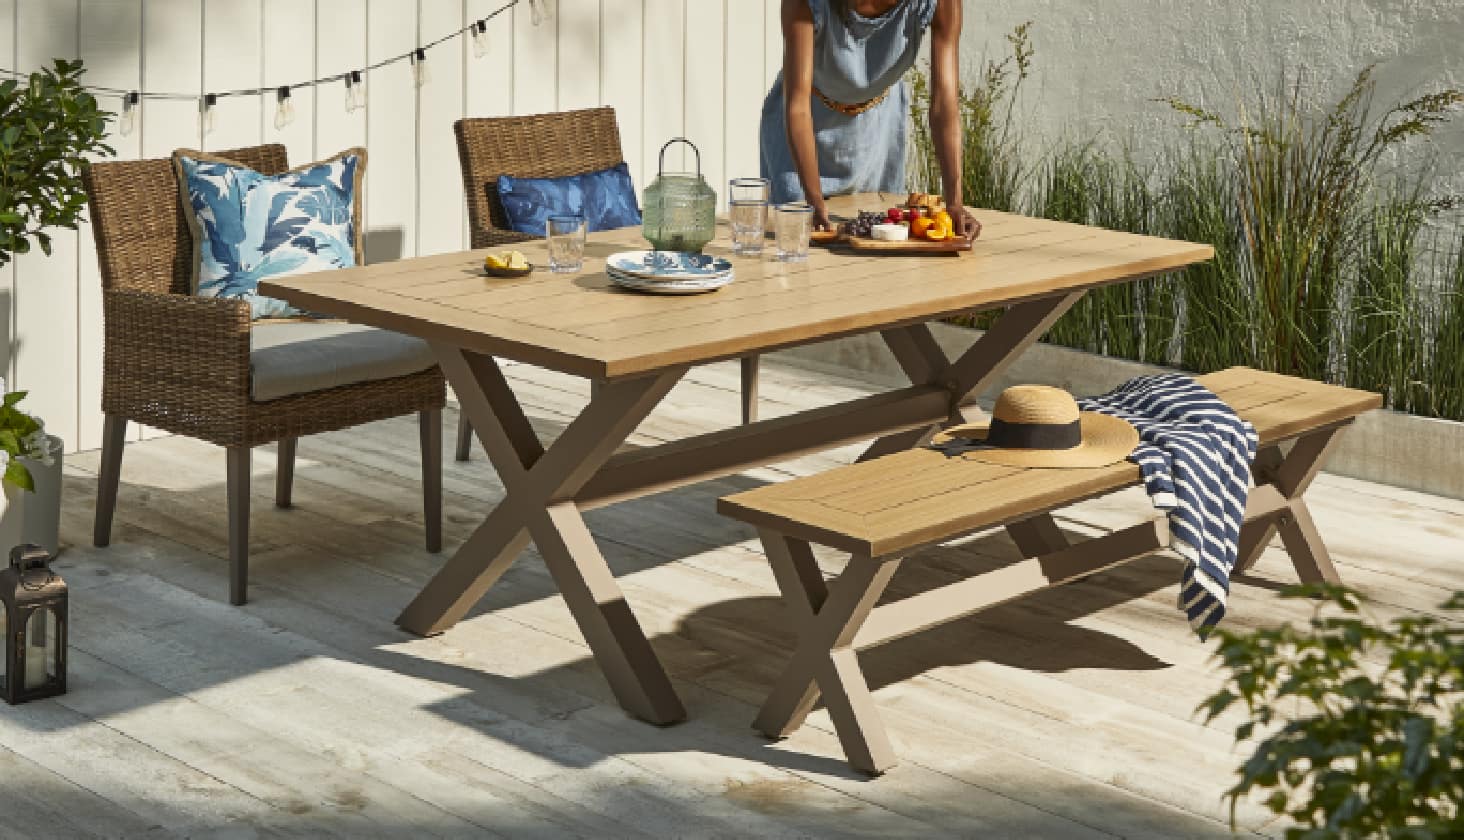 A woman putting a tray of food on a CANVAS Belwood Dining set in a backyard. 